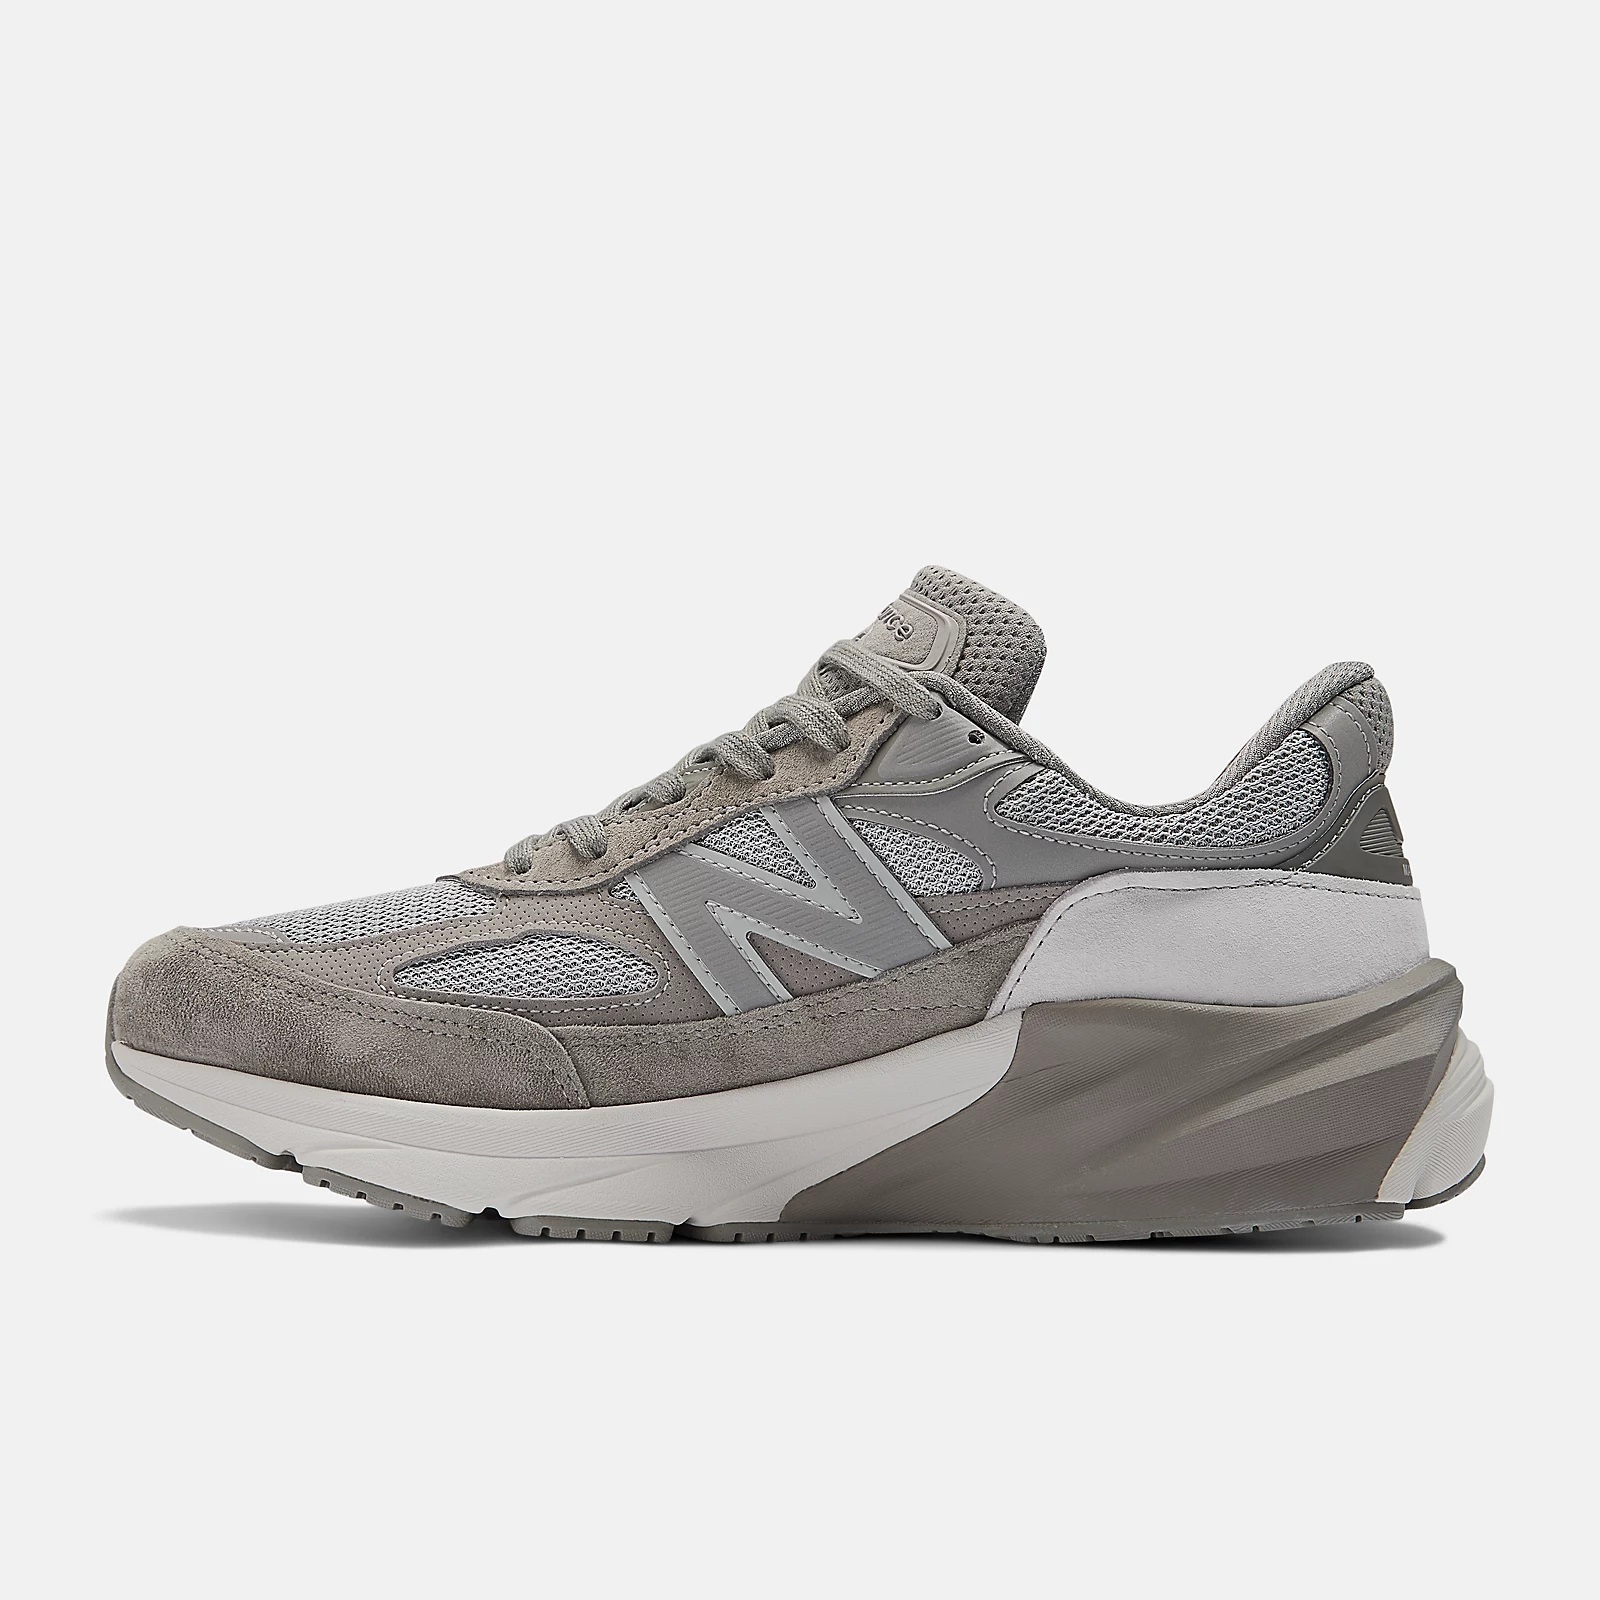 WTAPS x New Balance M990WT6 (Made in USA)